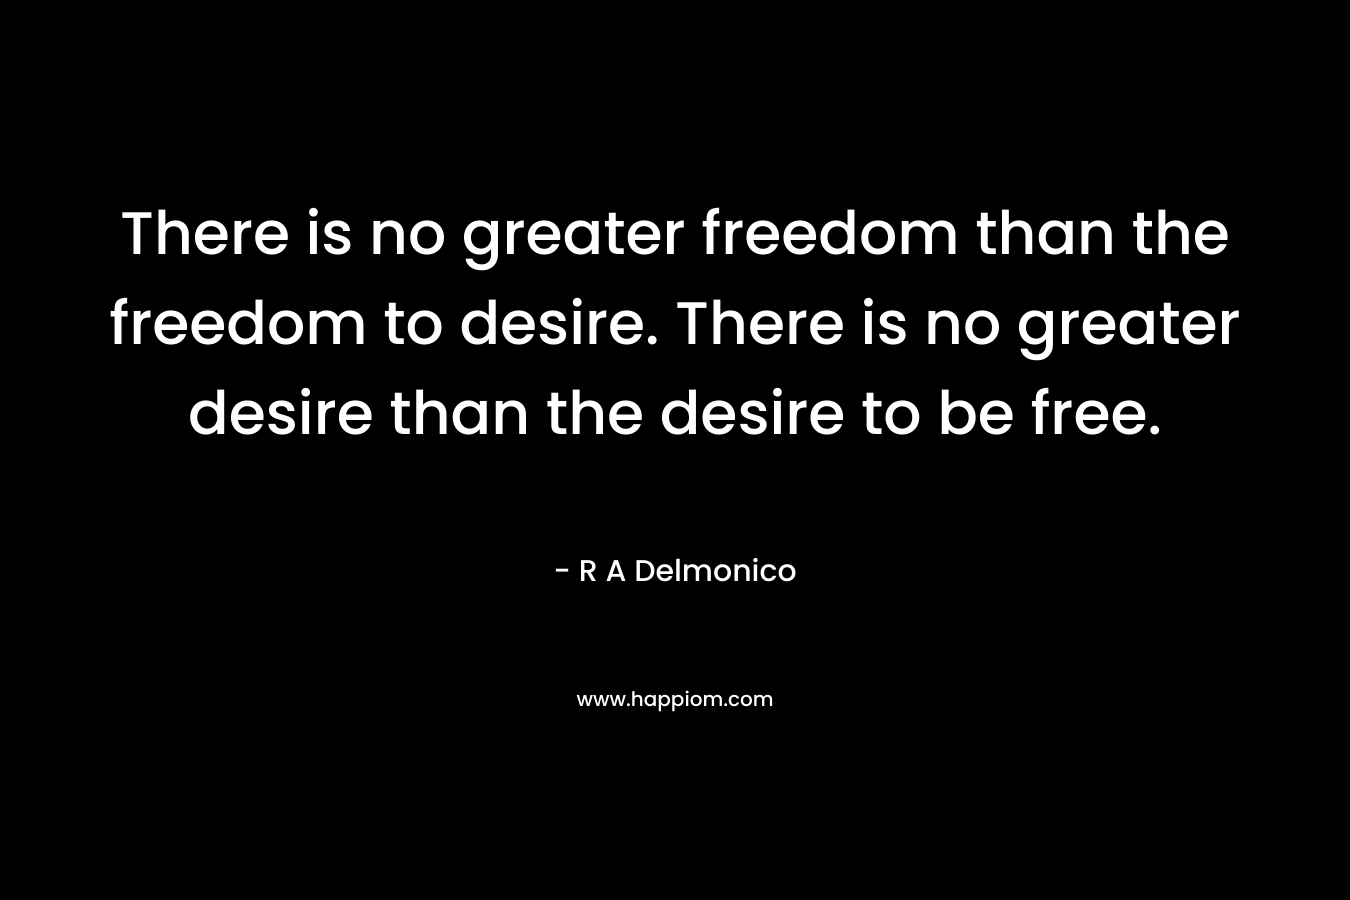 There is no greater freedom than the freedom to desire. There is no greater desire than the desire to be free.